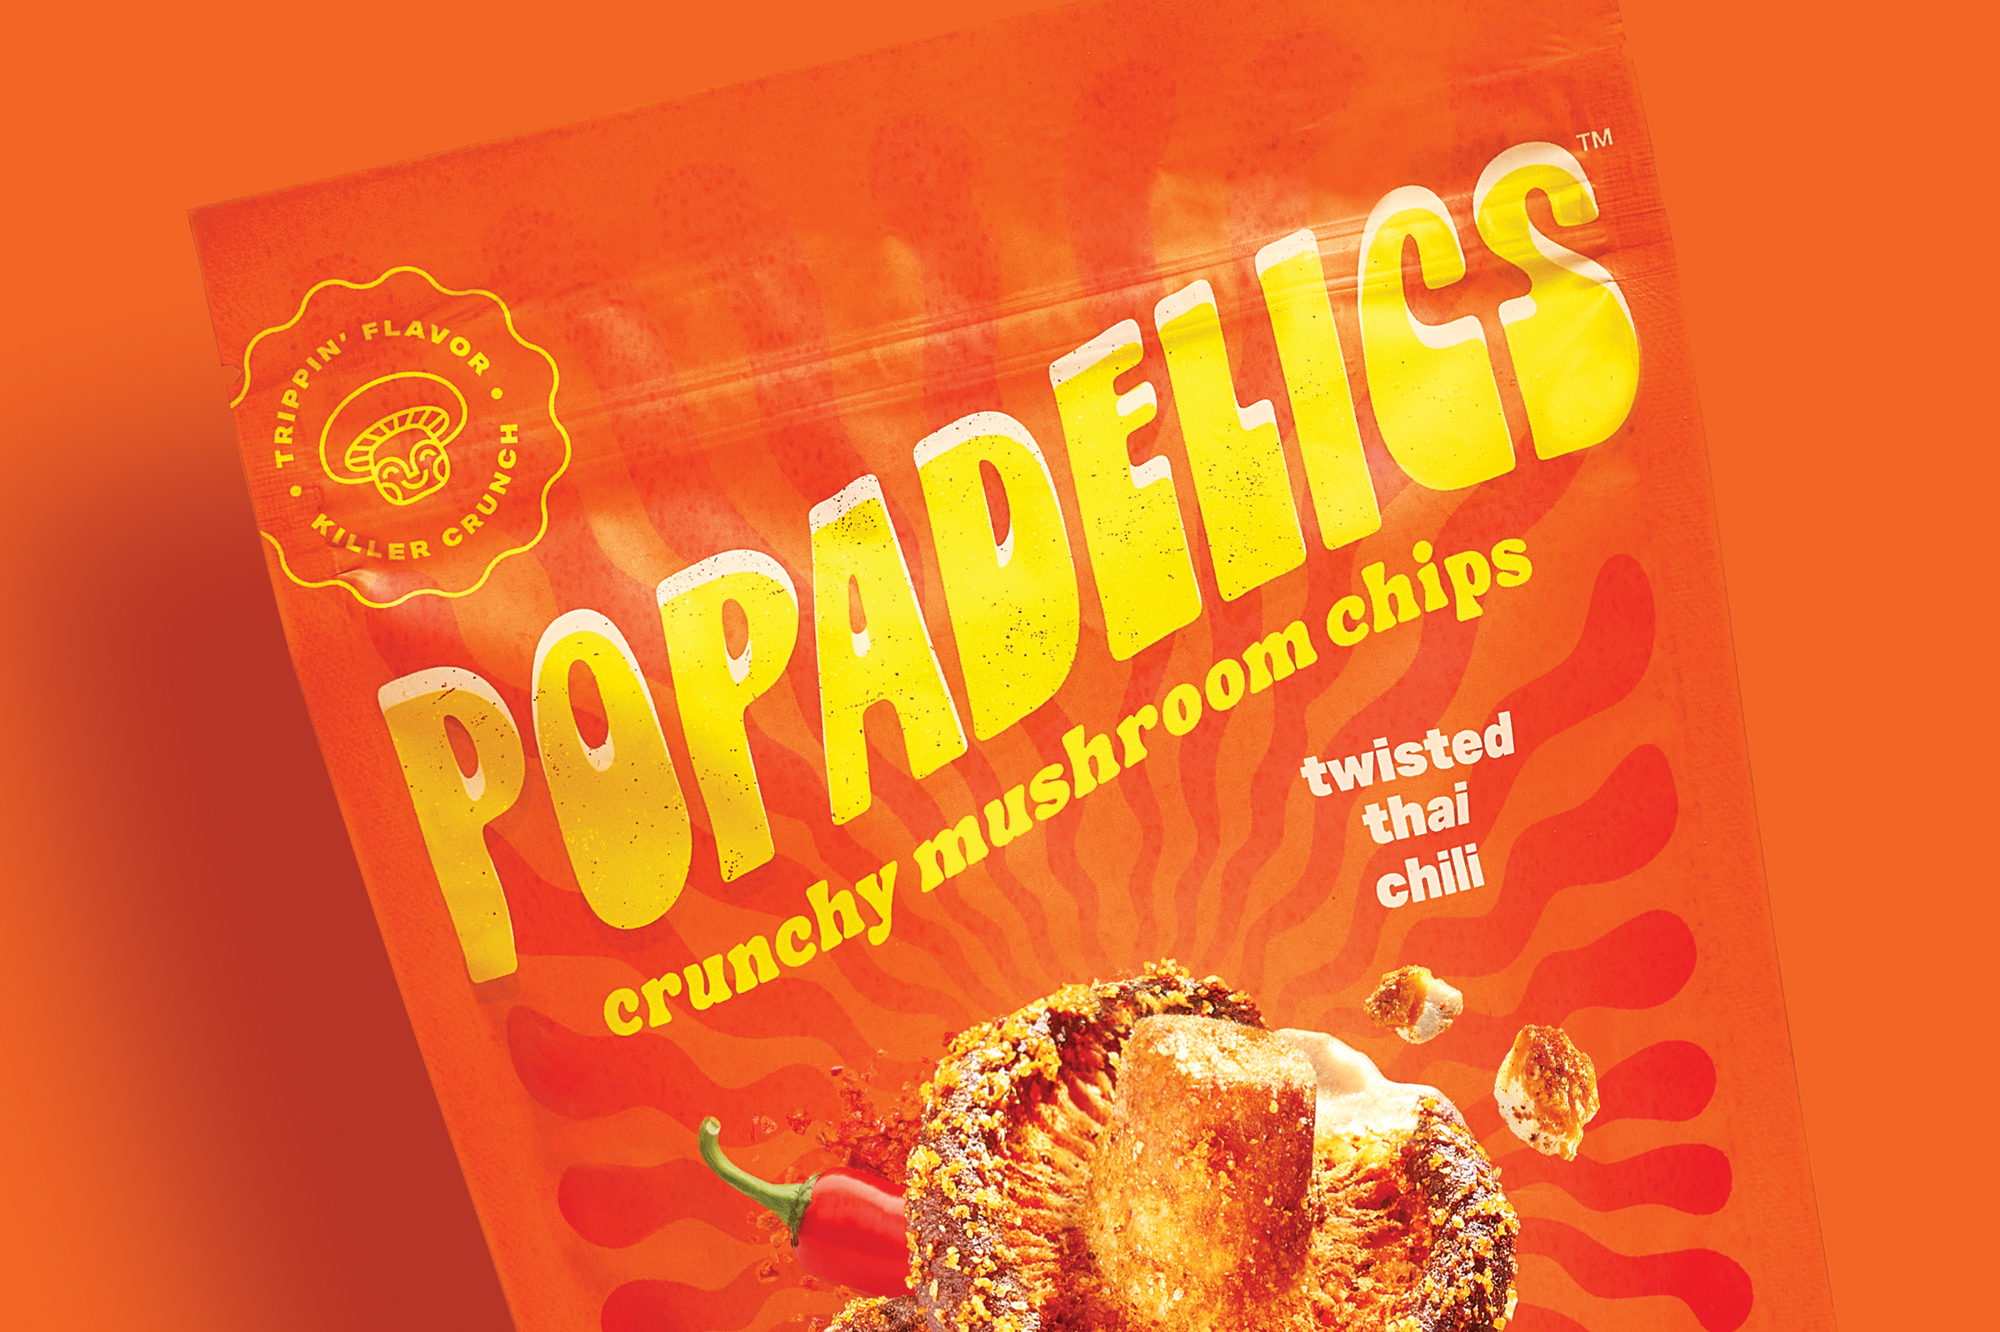 Popadelics snack packaging design by Freshmade.